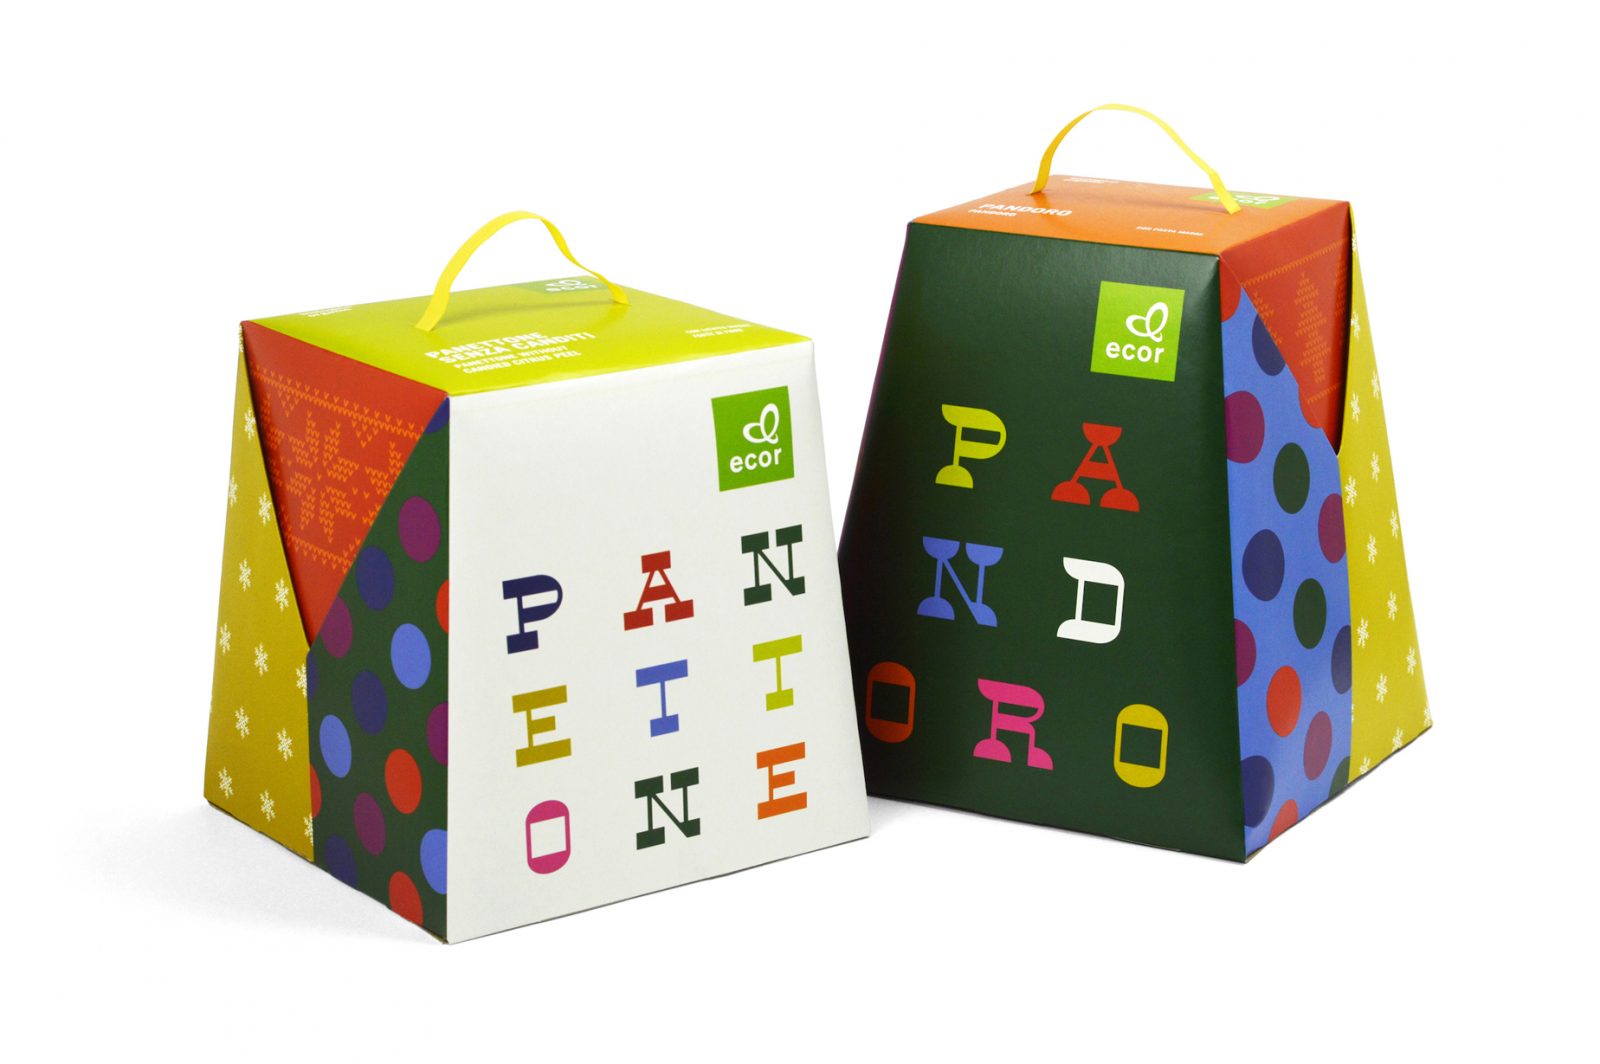 Ecor Panettone and Pandoro Packaging